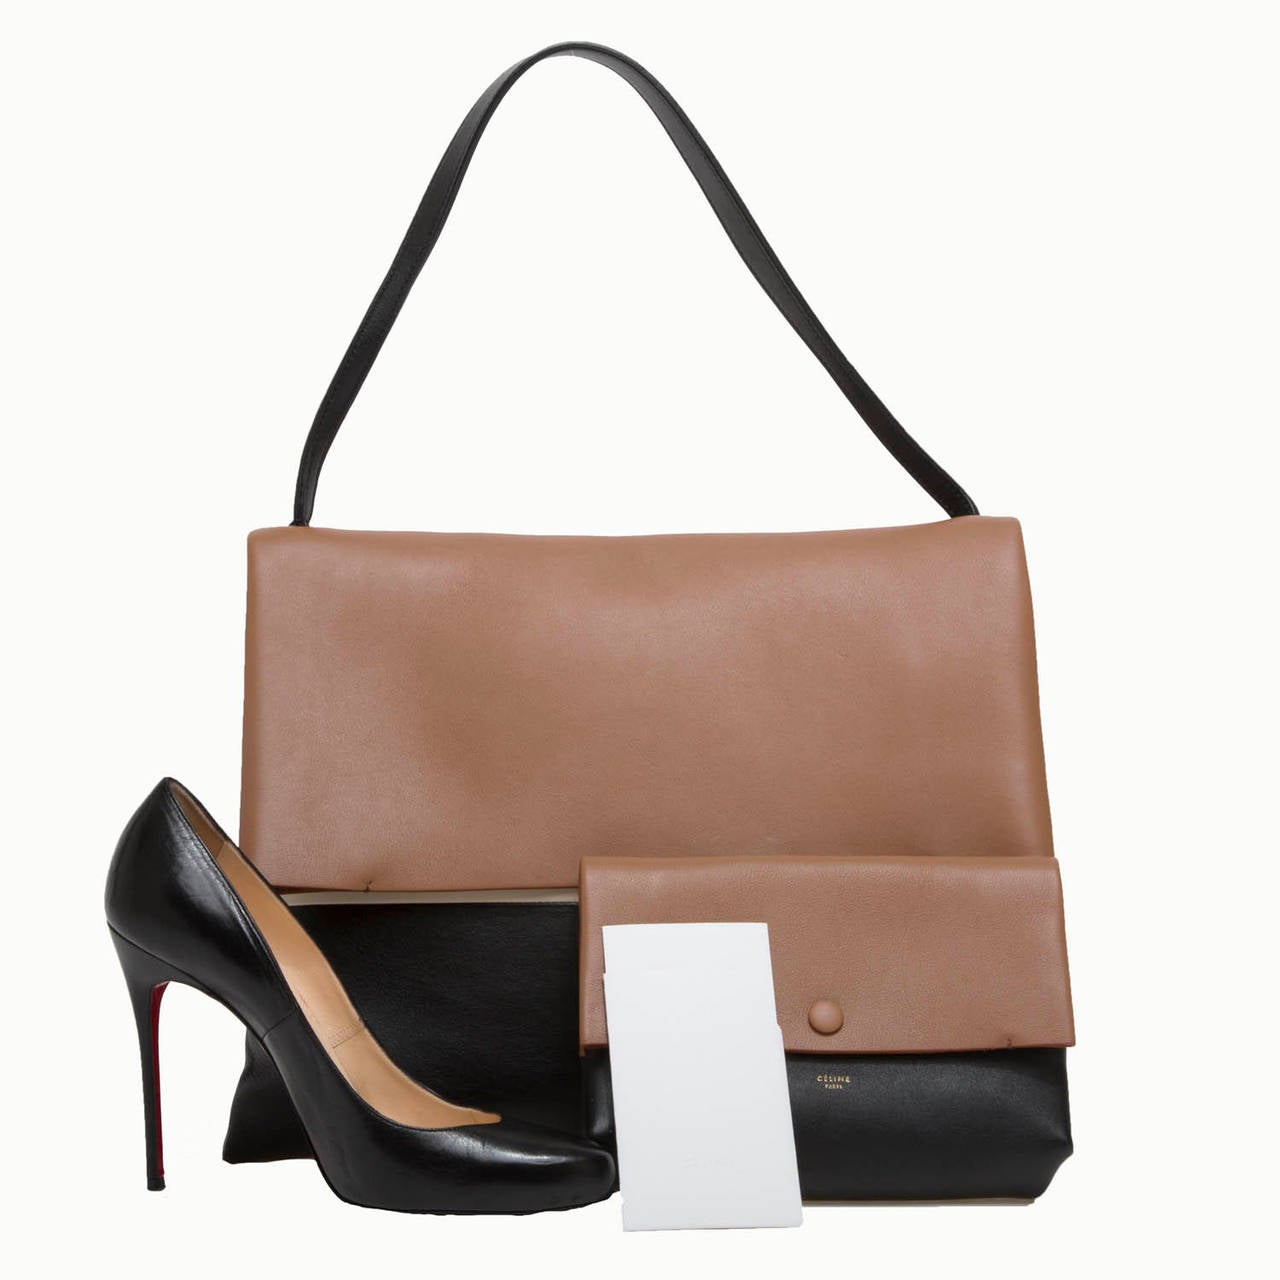 This beautiful Celine All Soft Tote is a desired handbag. It is constructed in tricolor calfskin leather in black, tan and white. This minimalist fold-over flap tote is light-weight and spacious and features a single leather strap. The matching